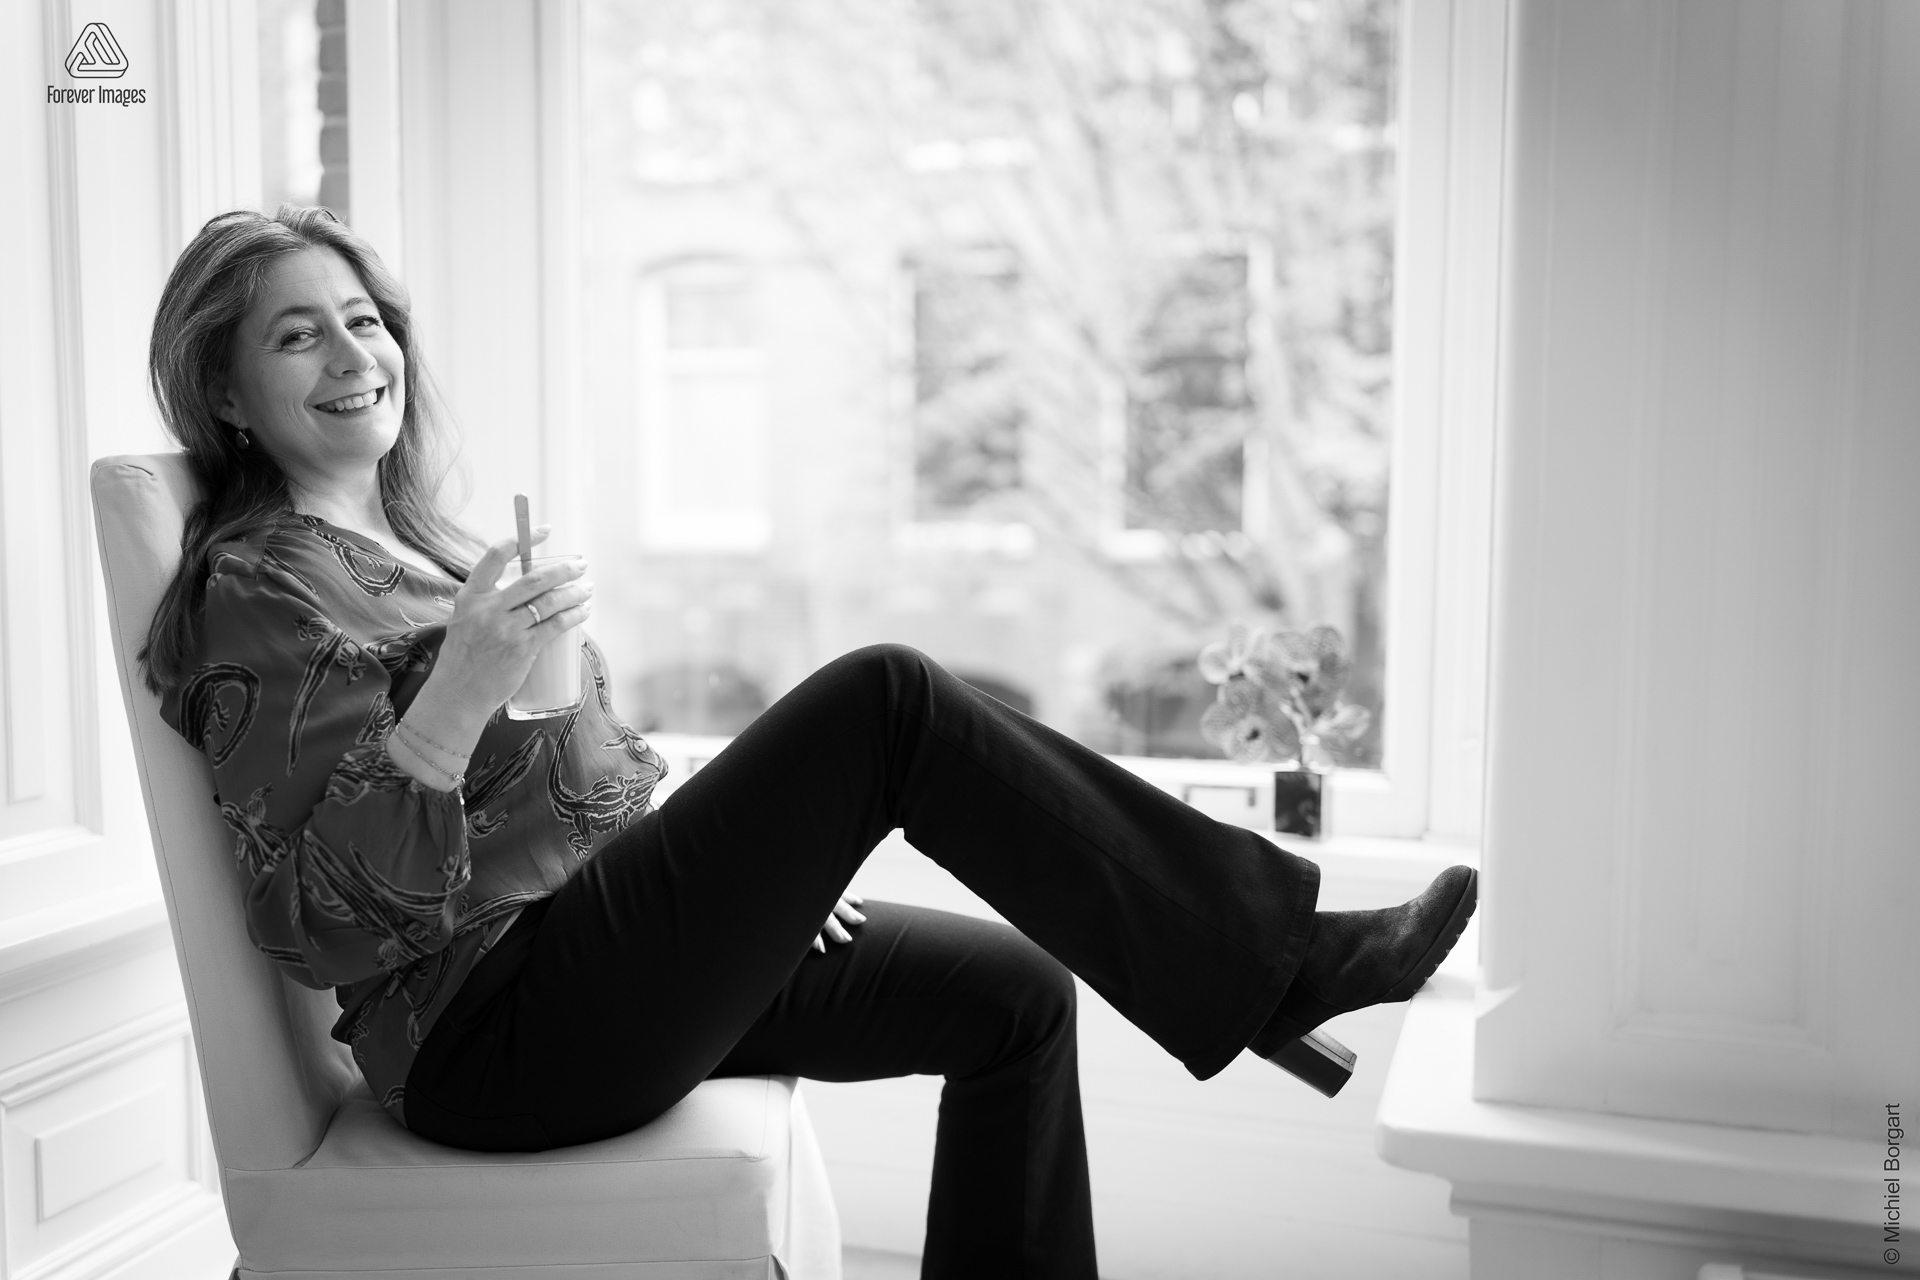 Portrait photo black and white B&W lady sitting with coffee by the window | Mirjam Bach Kleurkeuze | Portrait Photographer Michiel Borgart - Forever Images.